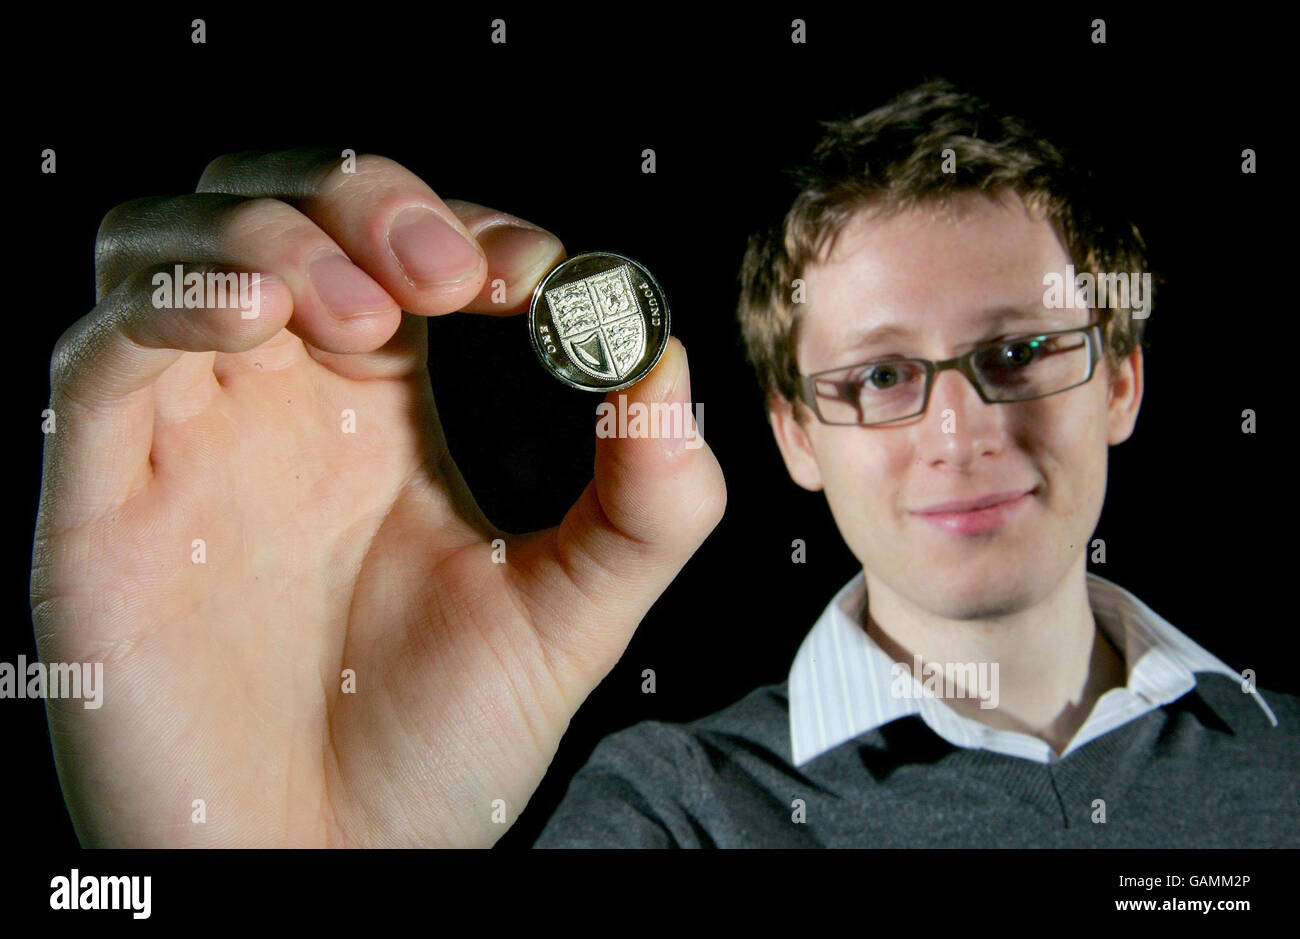 Matthew Dent, 26, a graphic designer from Bangor, North Wales, holds up a 1 coin with the new design as the Royal Mint unveiled their innovative new designs to feature on the reverse of seven of the United Kingdom's coins. Stock Photo